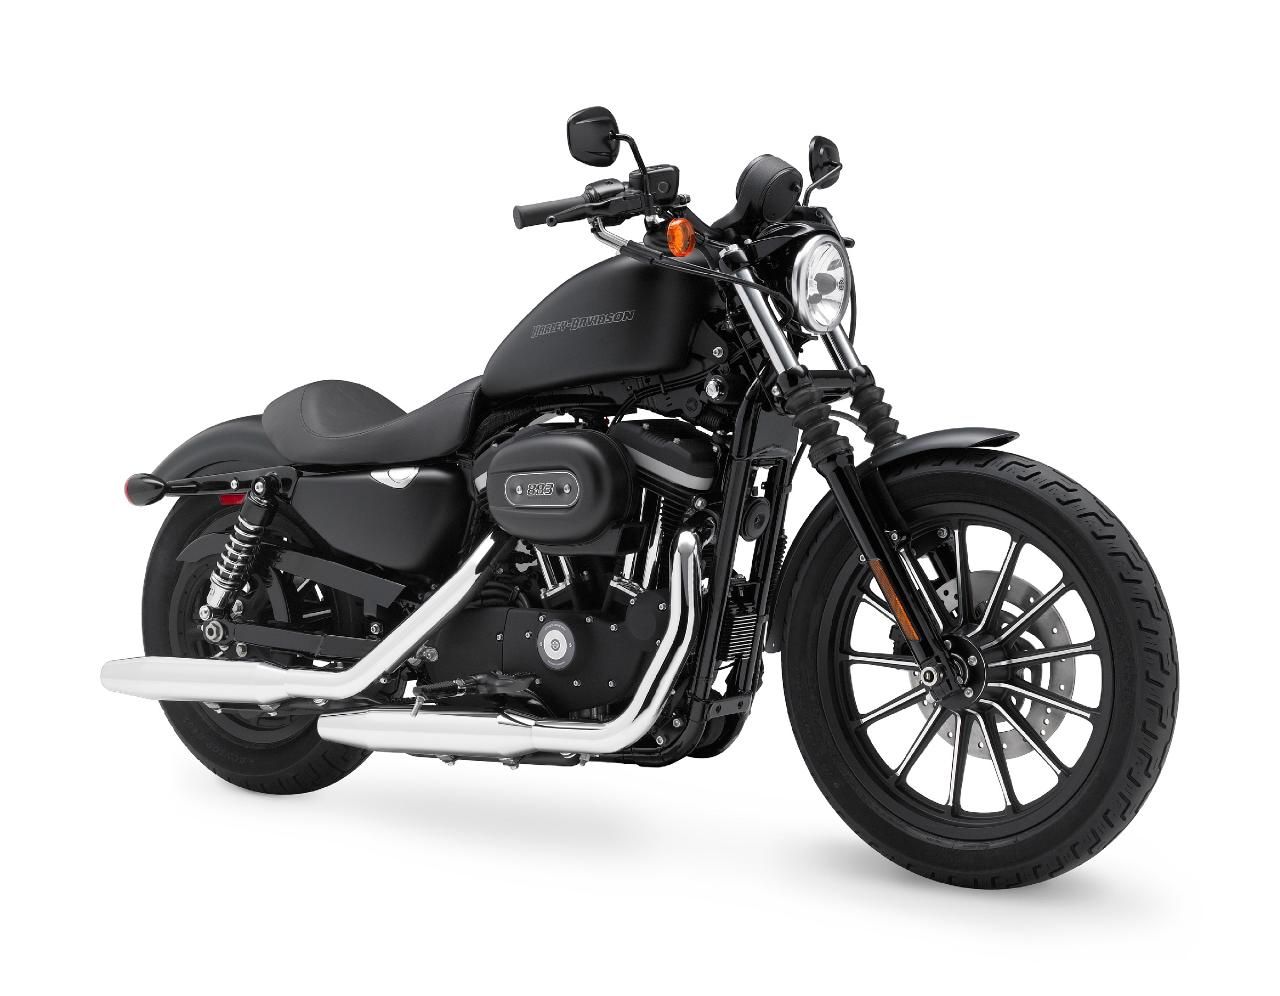 Harley Davidson Sportster Iron 883 Picture, Photo